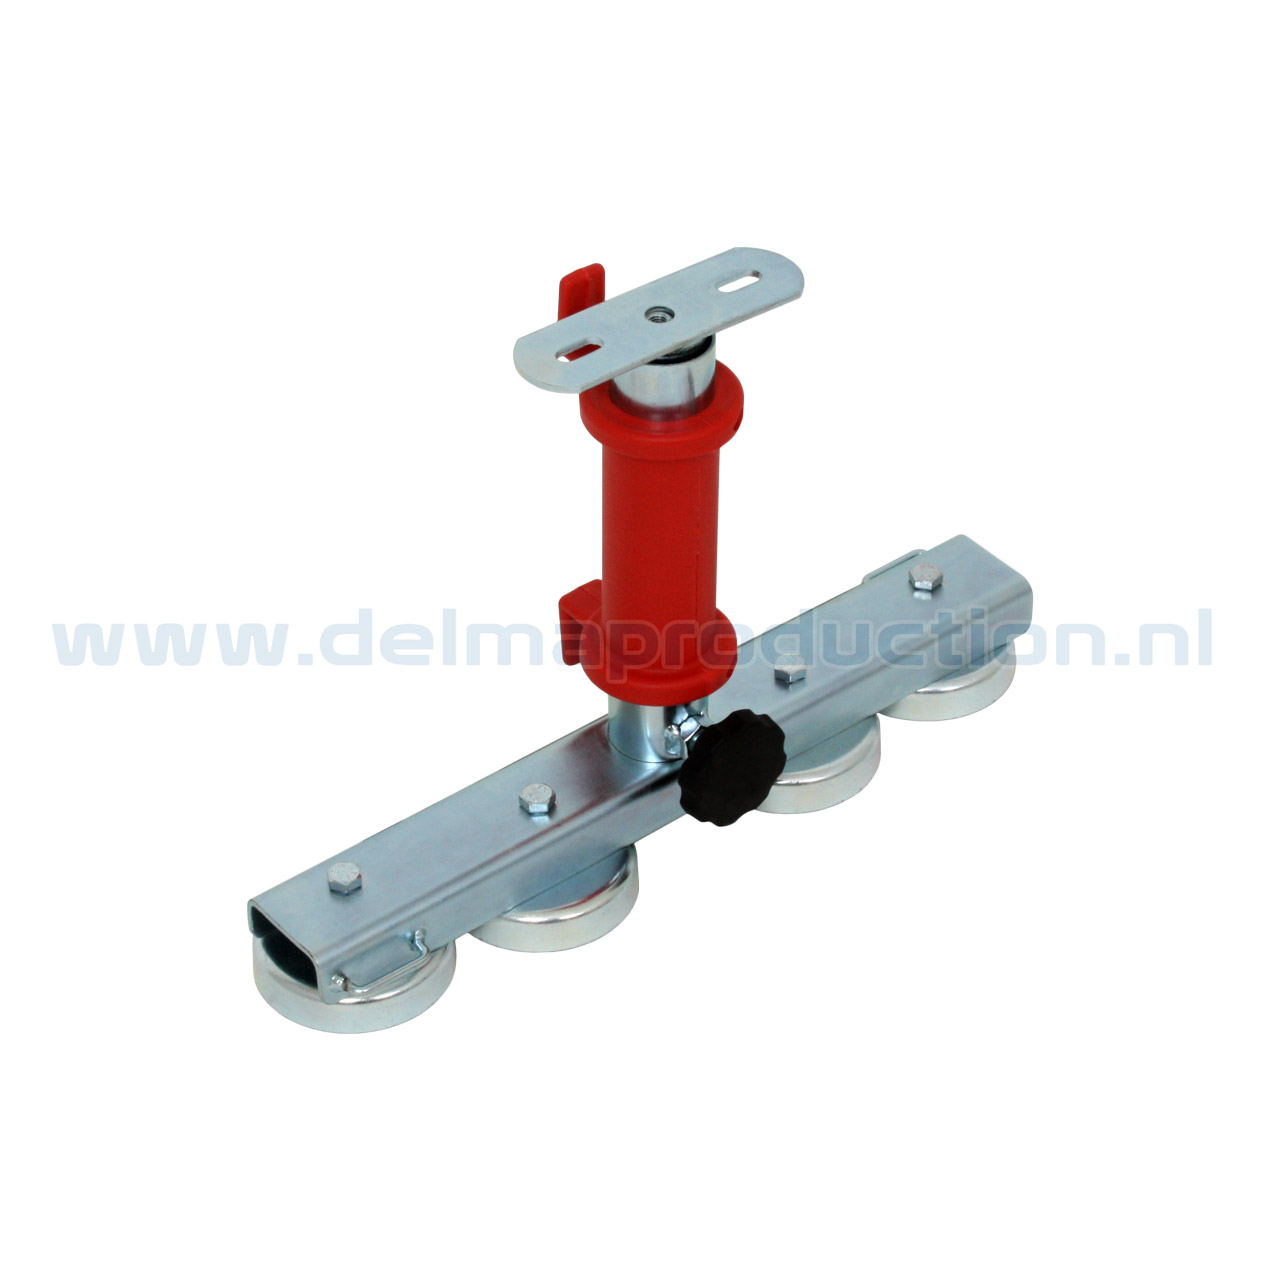 Magnet Work Light Stand with 4 magnets (1)